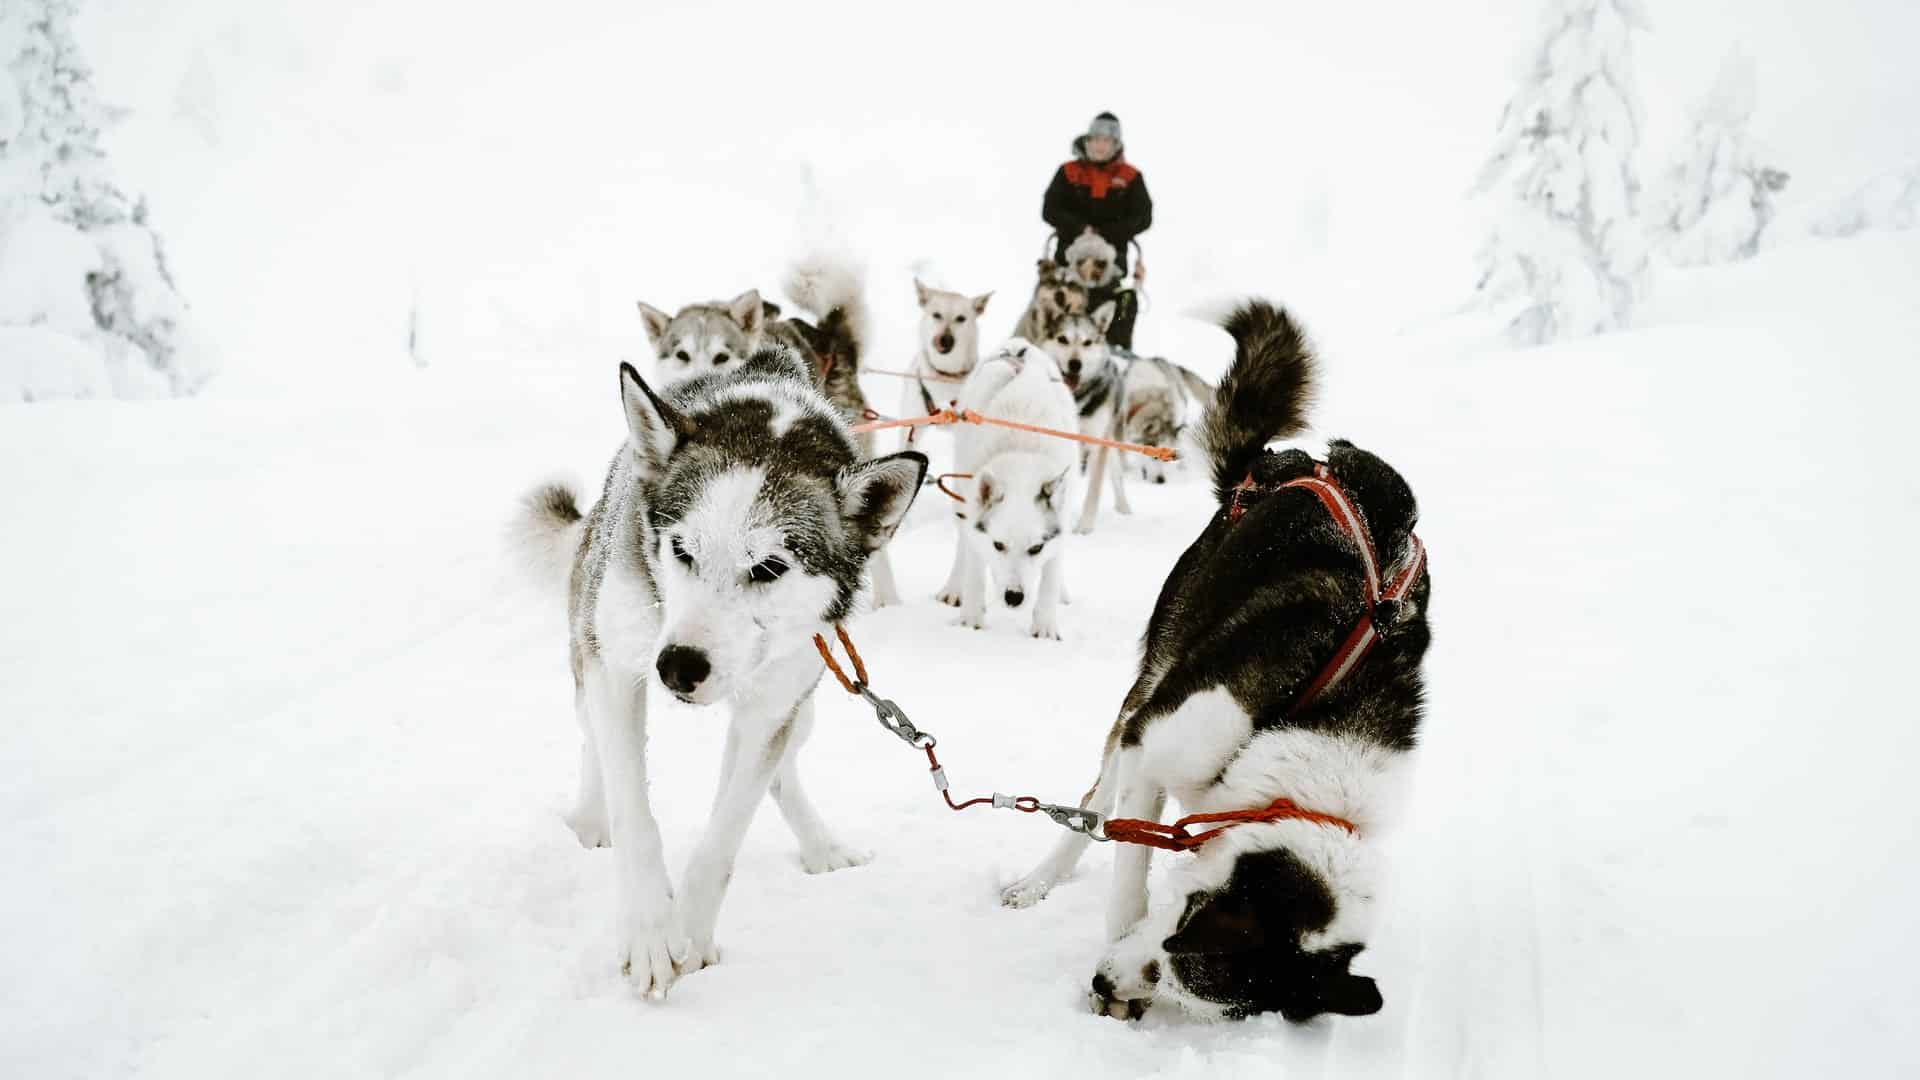 Husky dogs in the snow